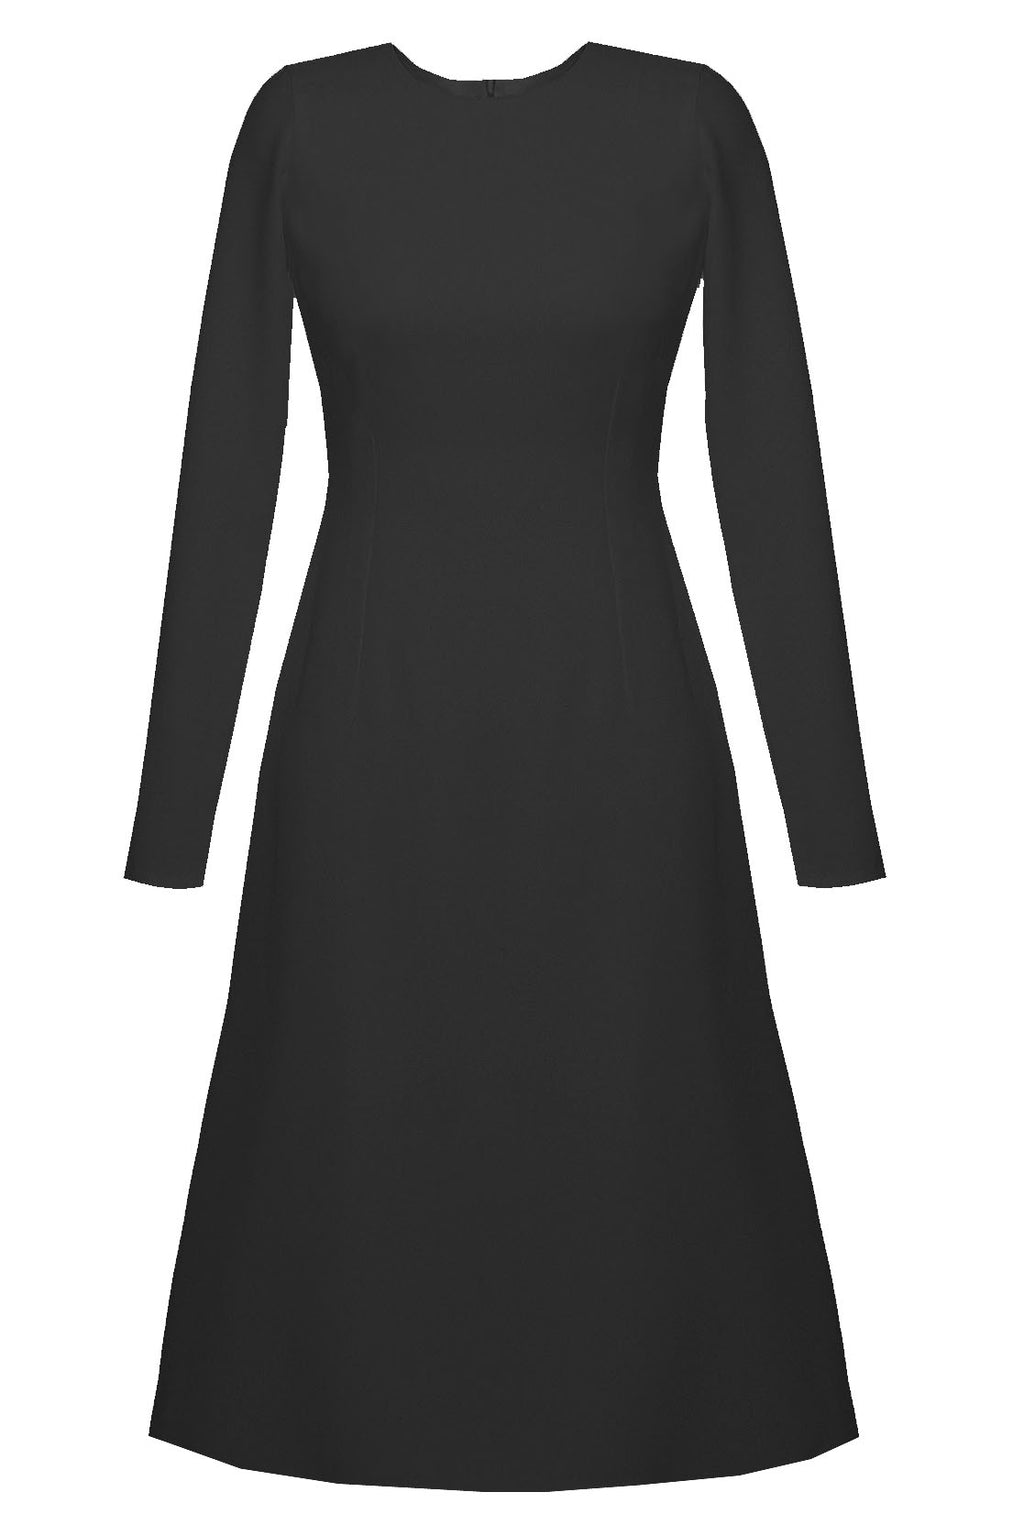 CaeliNYC High Quality A-line Dress with Long Sleeves 